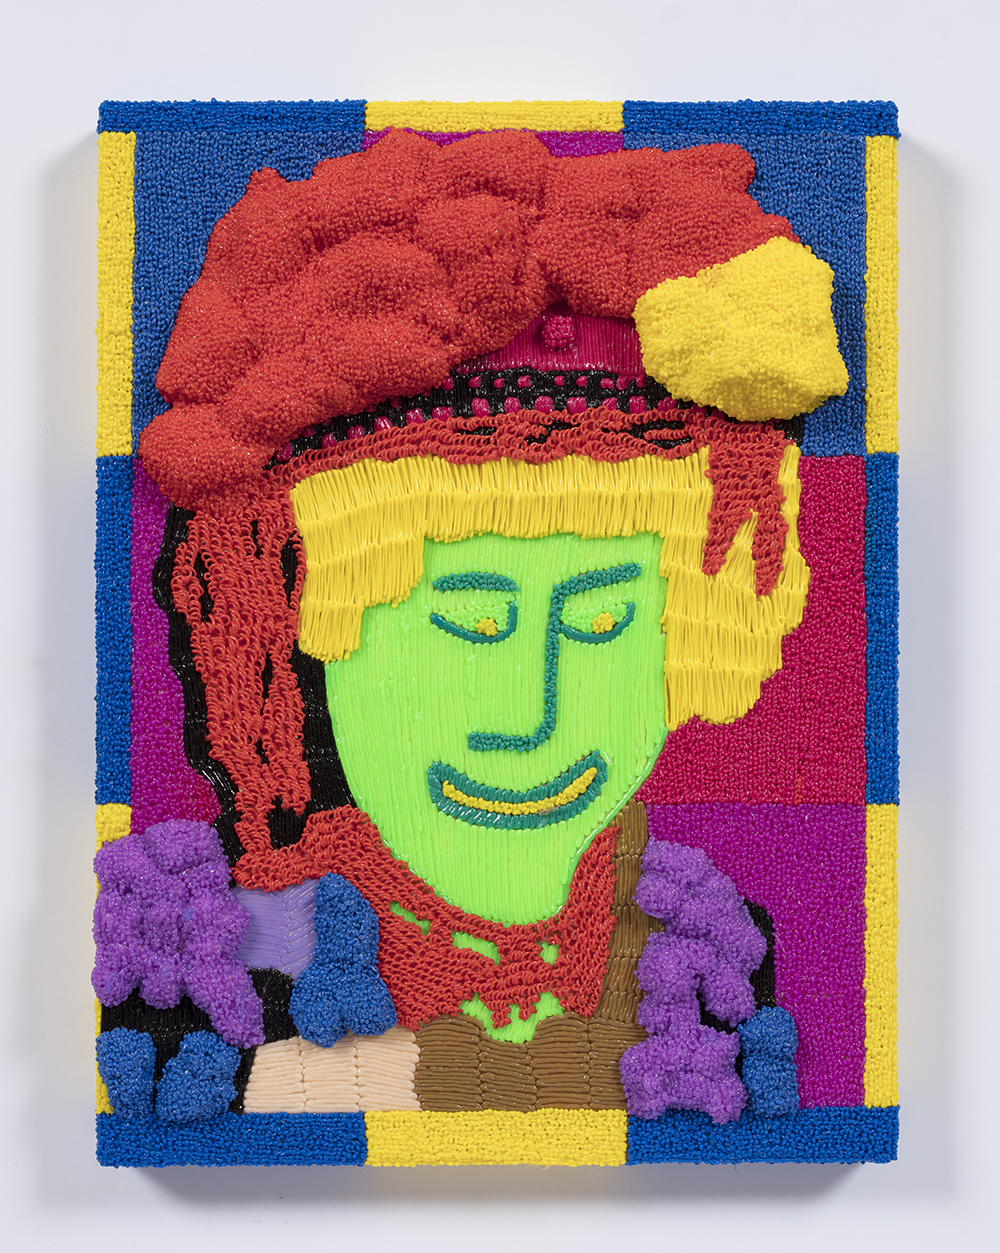 Dominic Dispirito. <em>The pearly witch of shoreditch</em>, 2018. Manually printed PLA plastic on board, 11 3/4 x 8 1/4 inches  (30 x 21 cm)